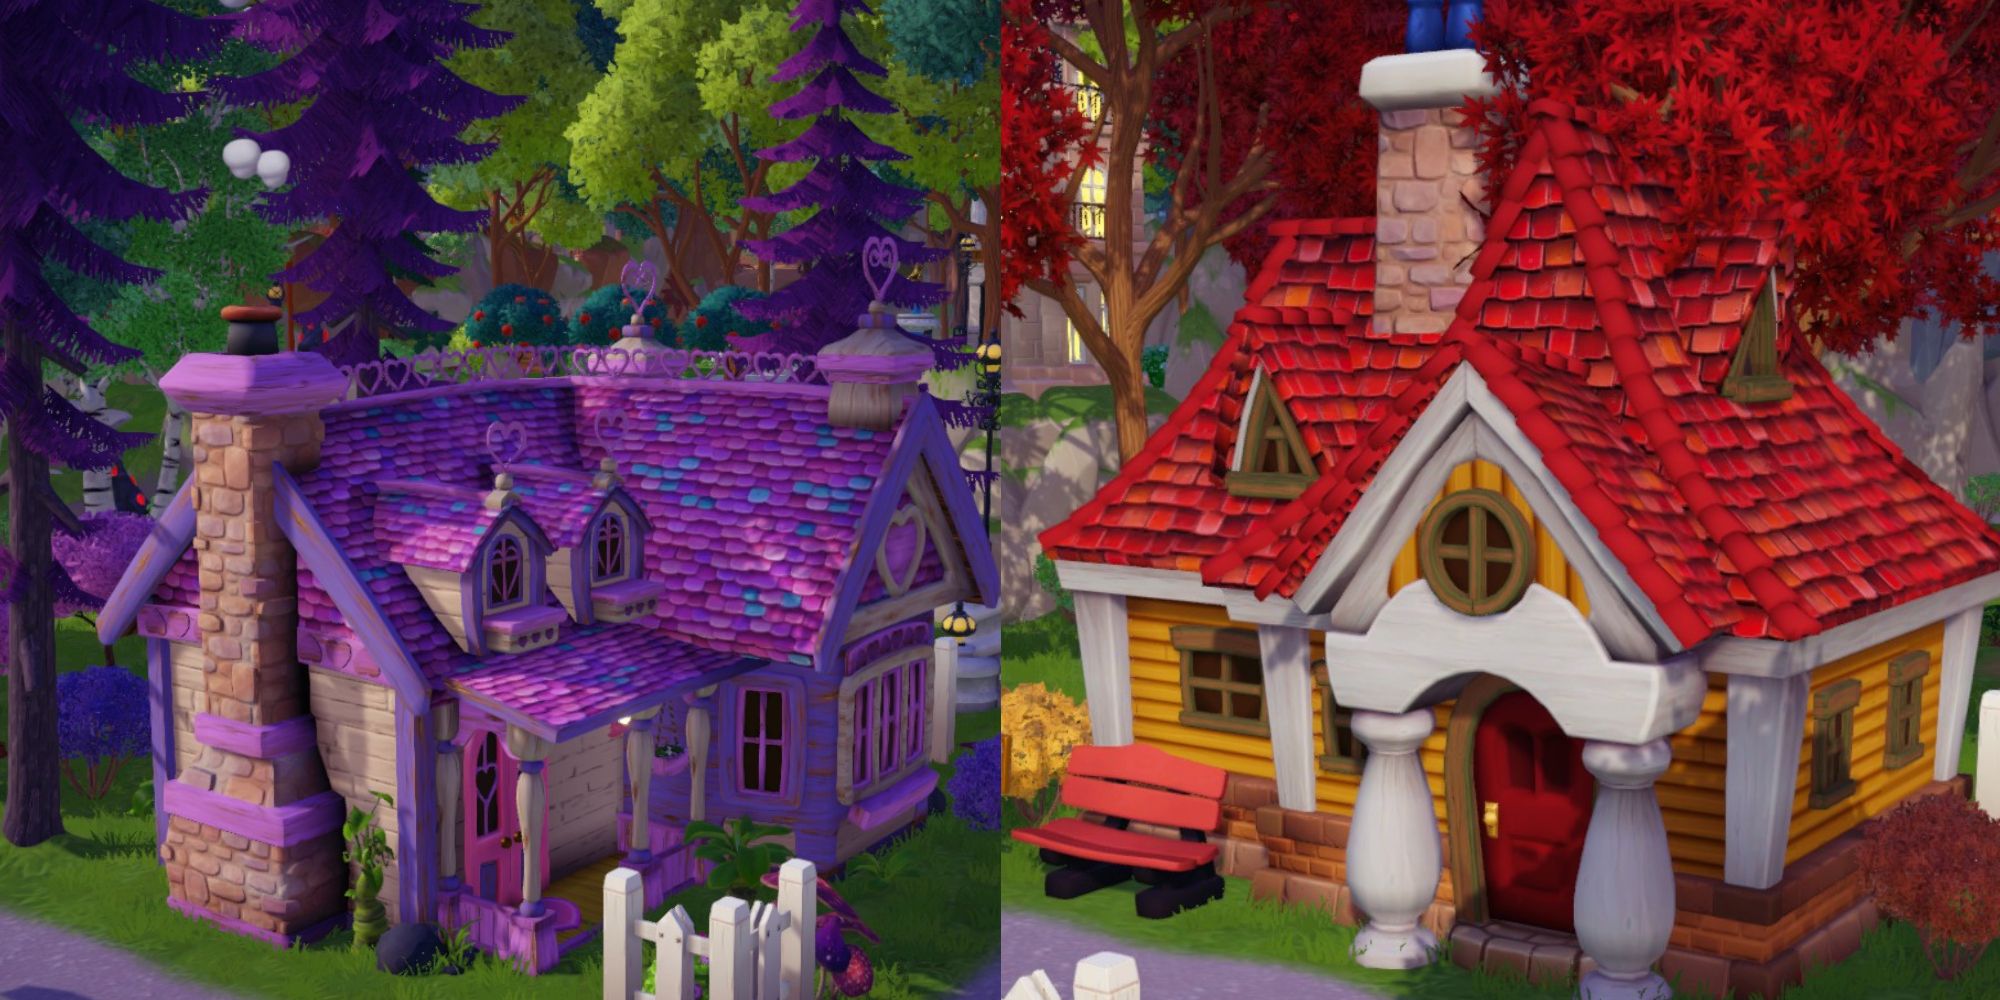  minnie mouse's house and mickey mouse's house color coated